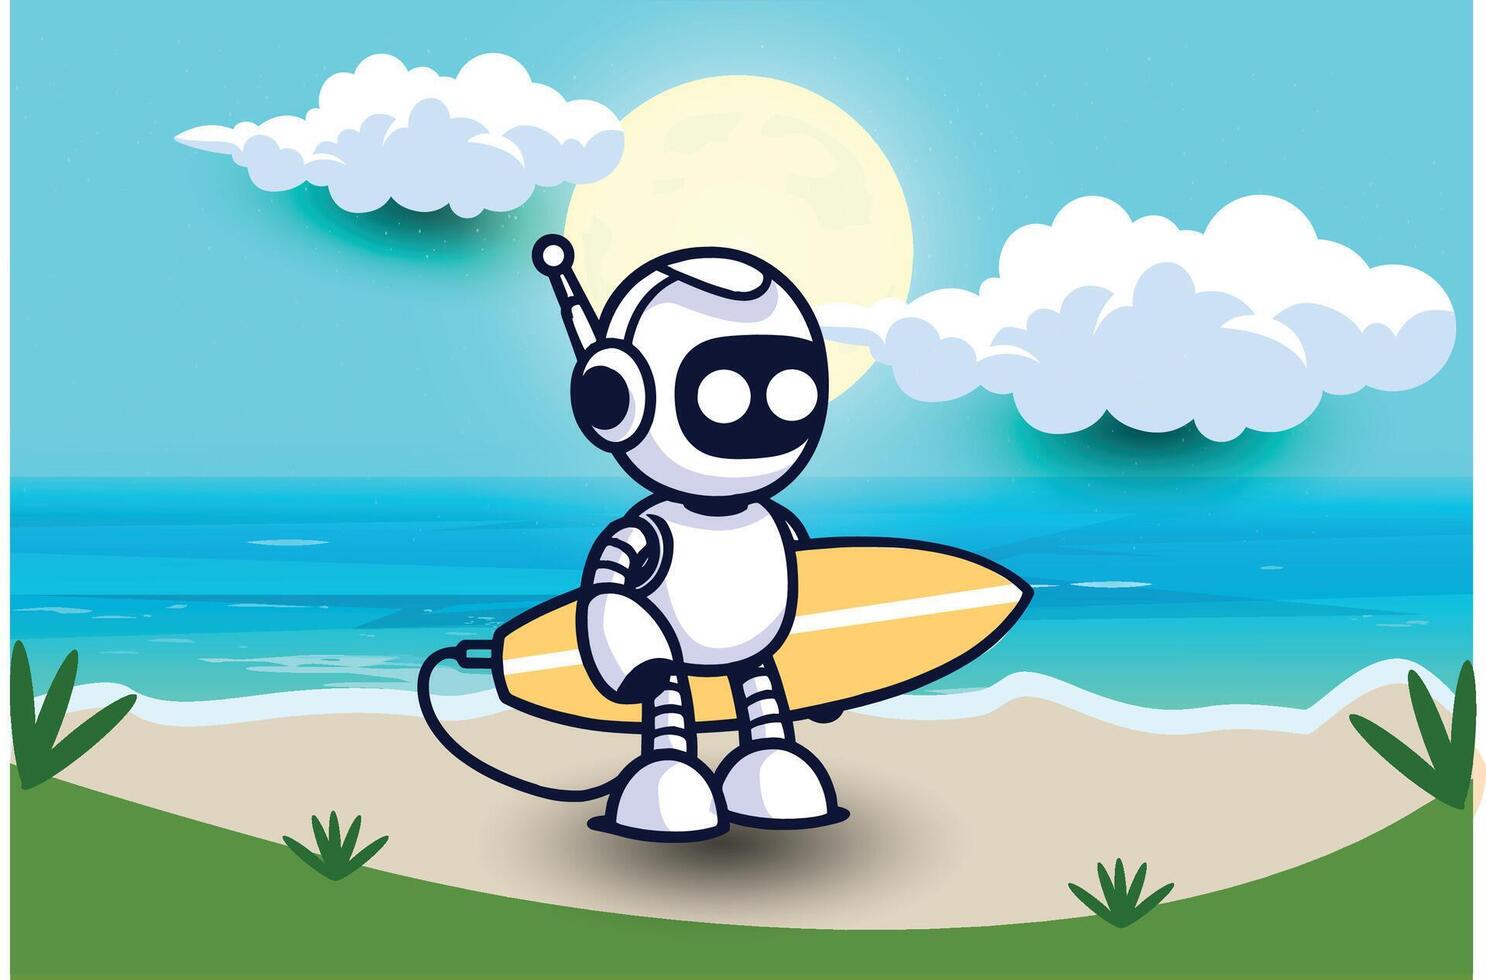 Cute Robot bring a surfboard for surfing. background on beach Cartoon Vector Icon Illustration. Concept Isolated Premium Vector.Flat Cartoon Style